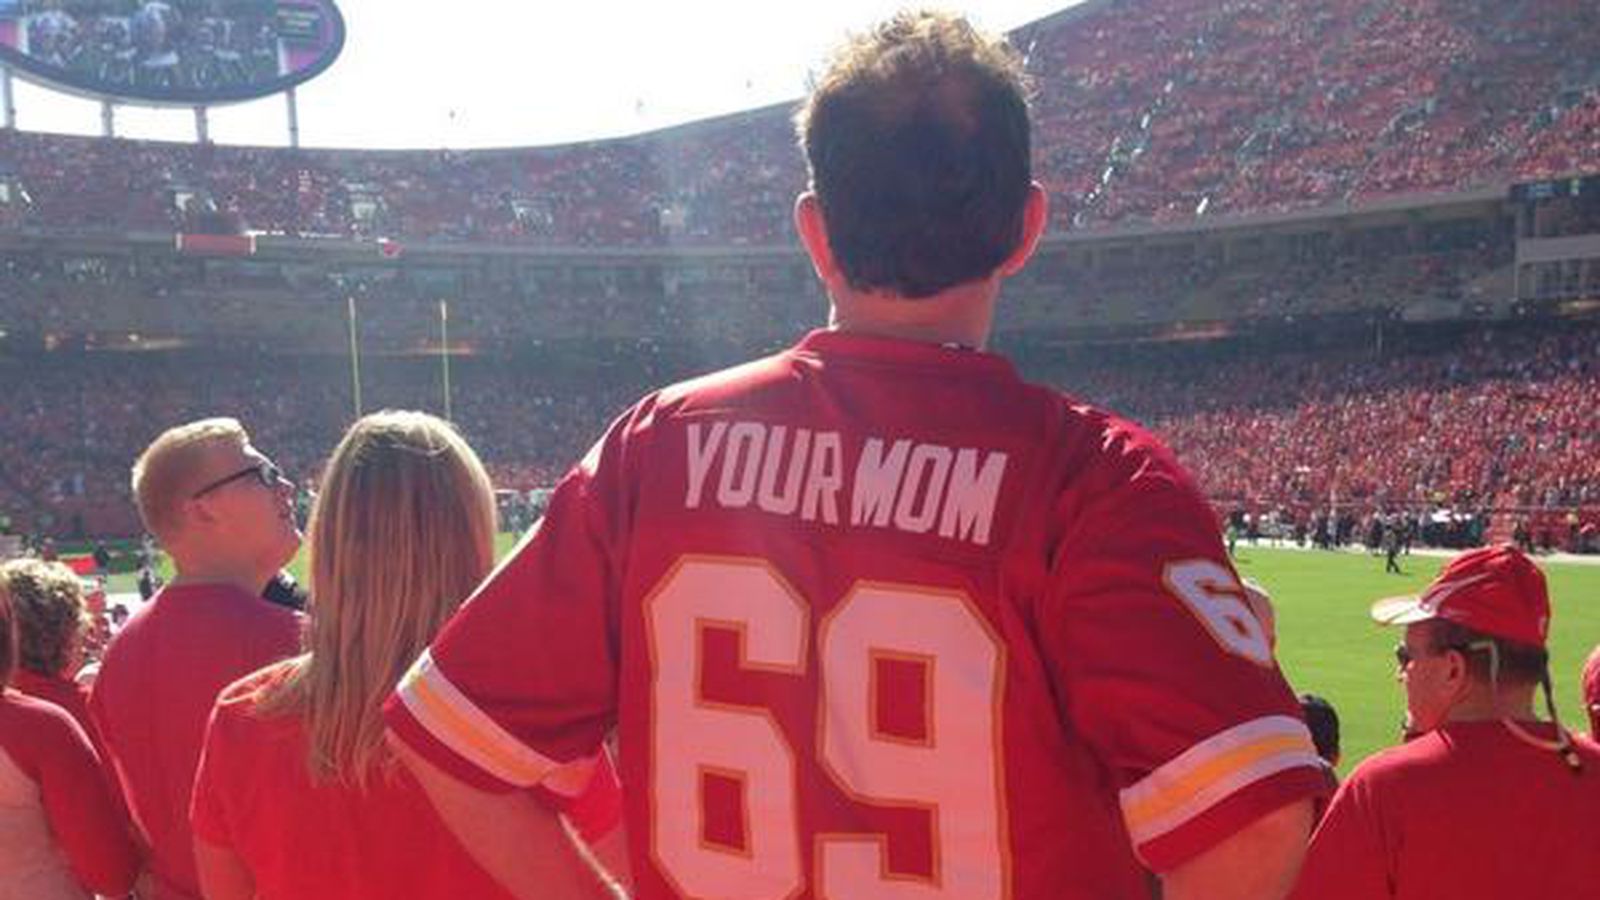 Here\'s a Chiefs fan in a 69 YOUR MOM jersey - SBNation.com